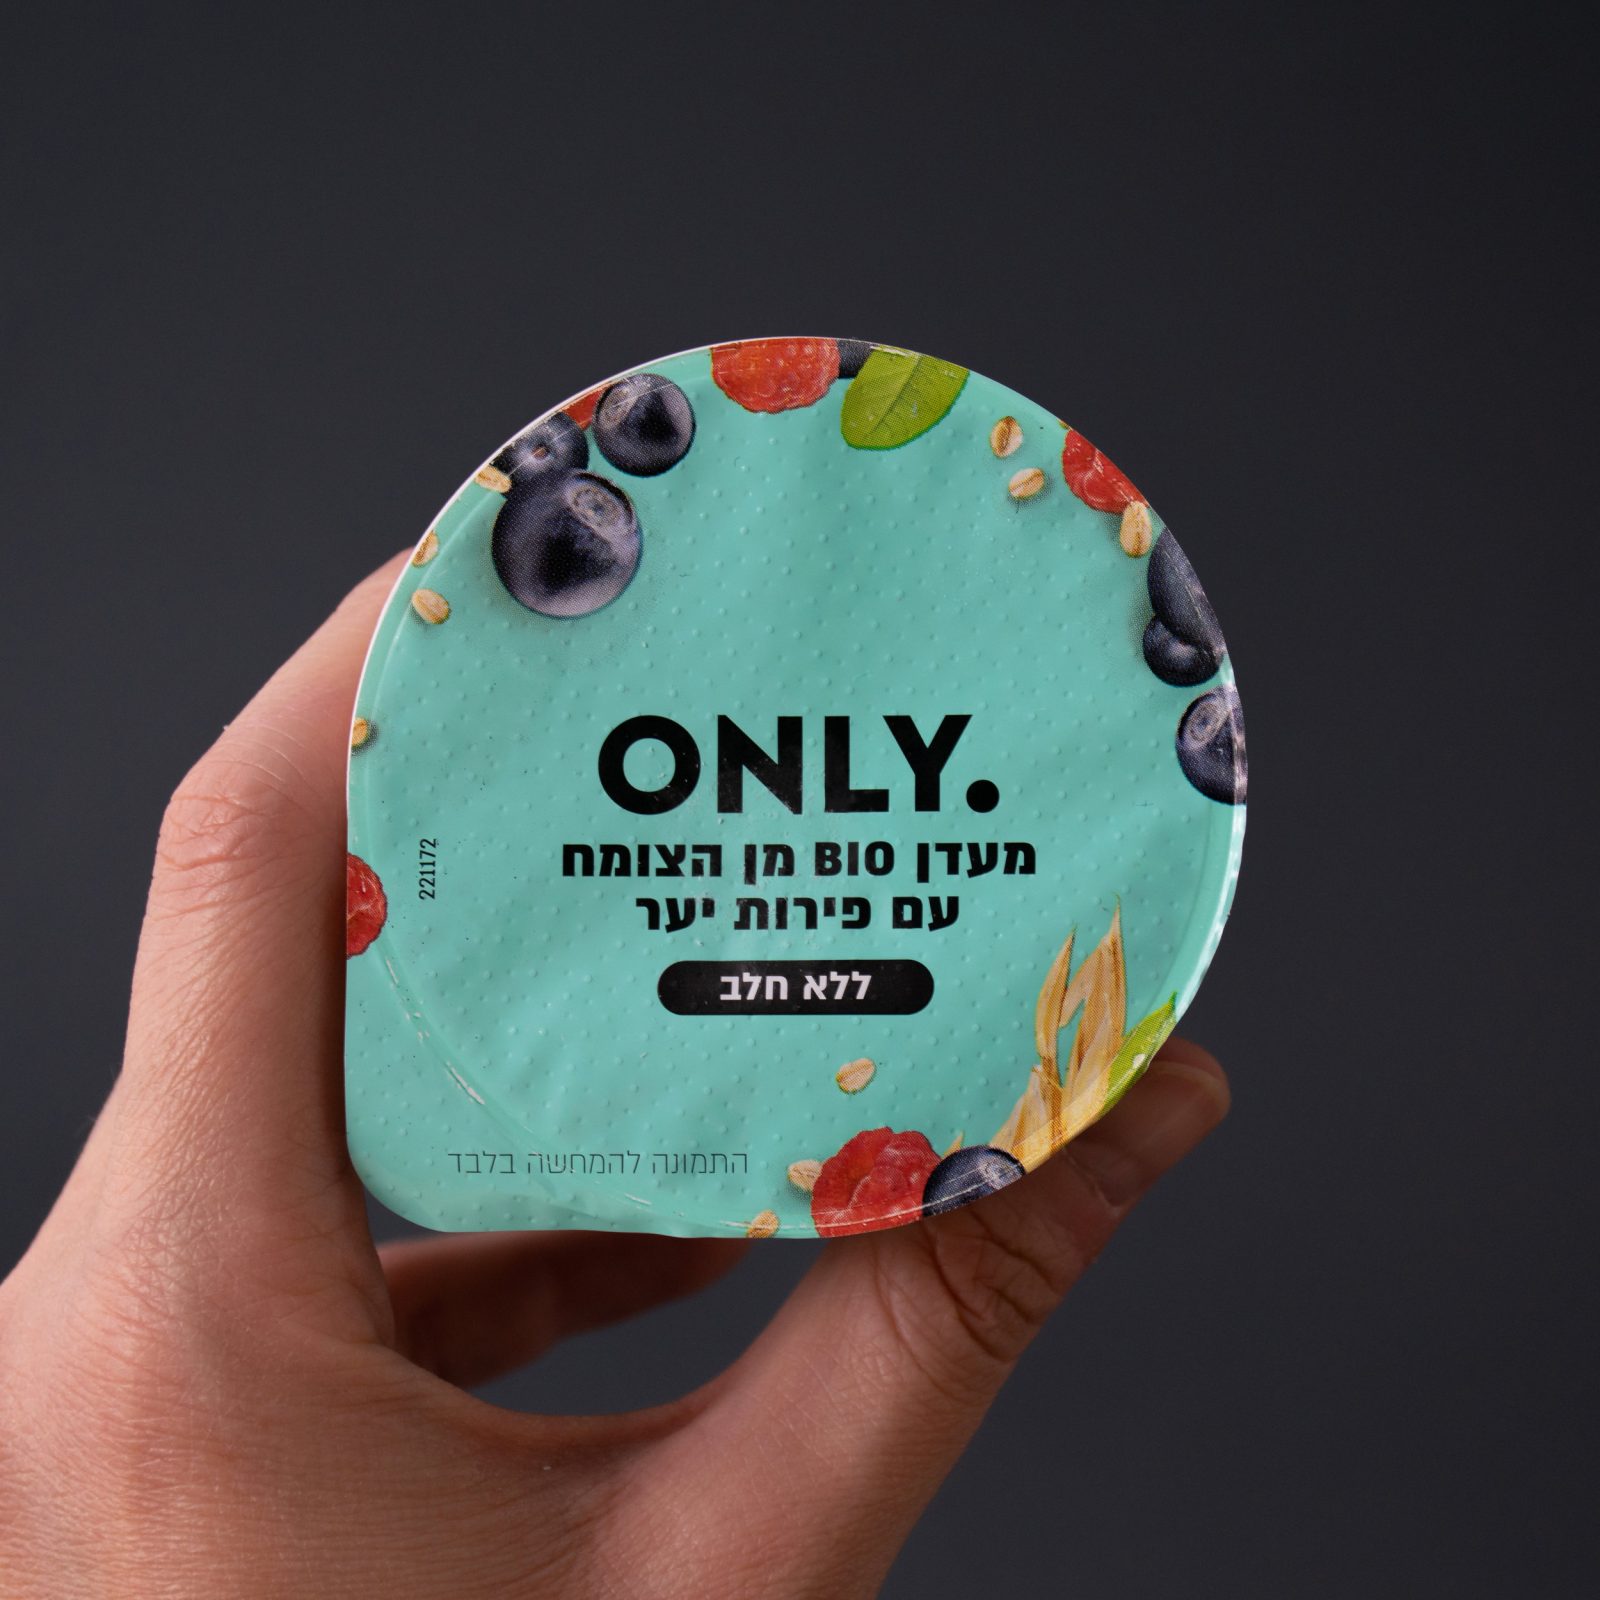 A Fresh Take on Packaging for Non-Dairy Probiotic Snack